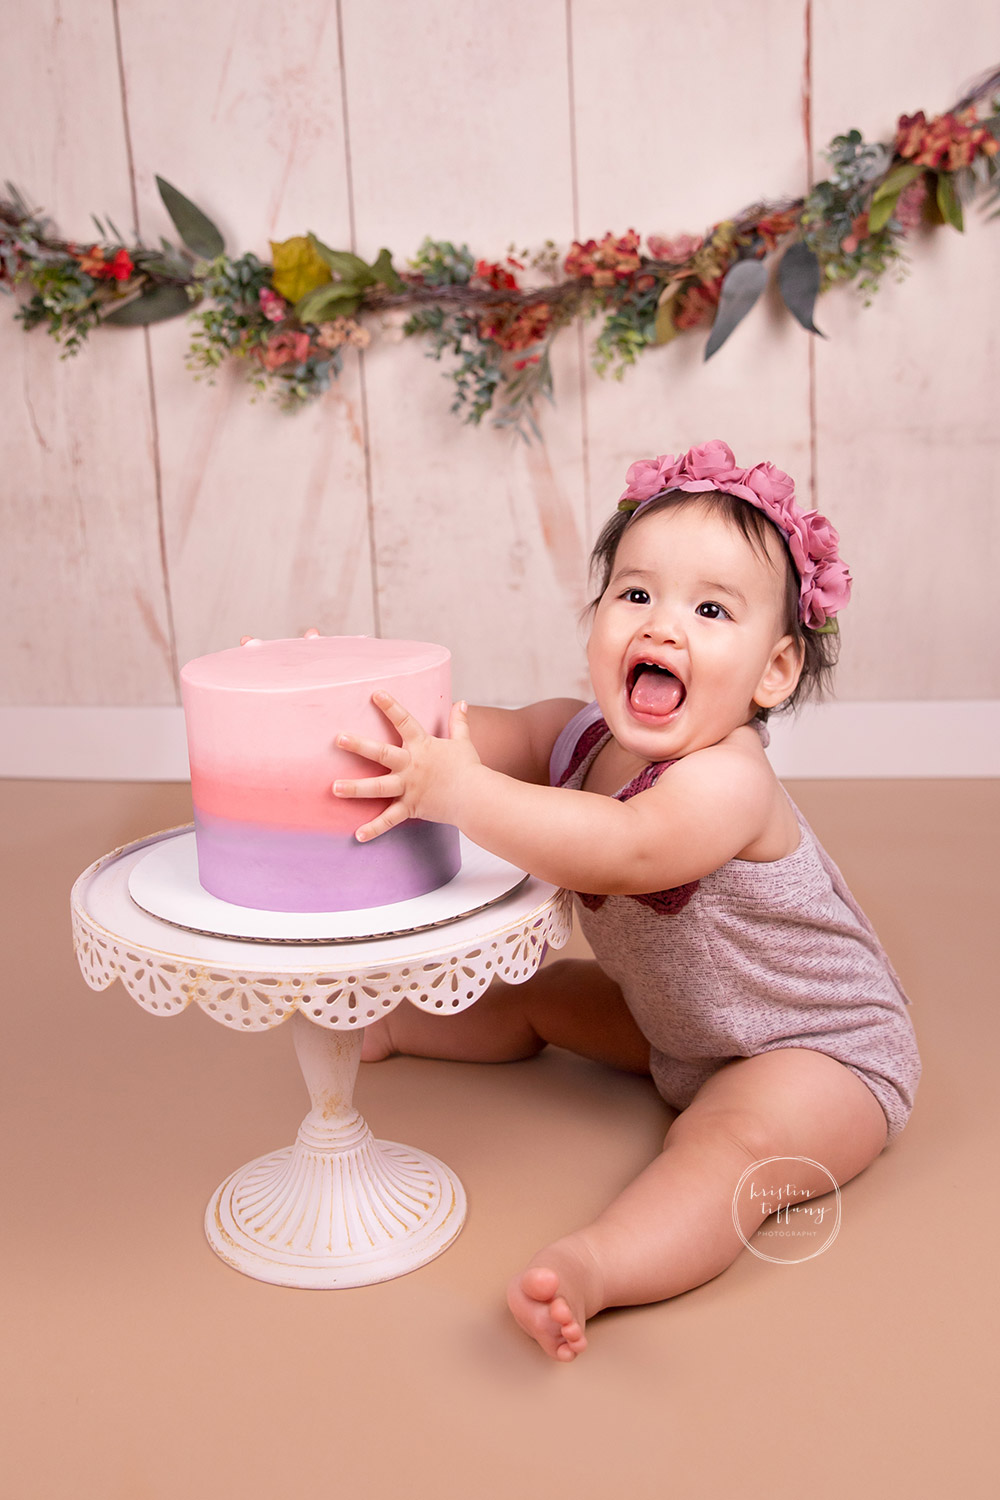 a photo of a baby girl at a cake smash photo session